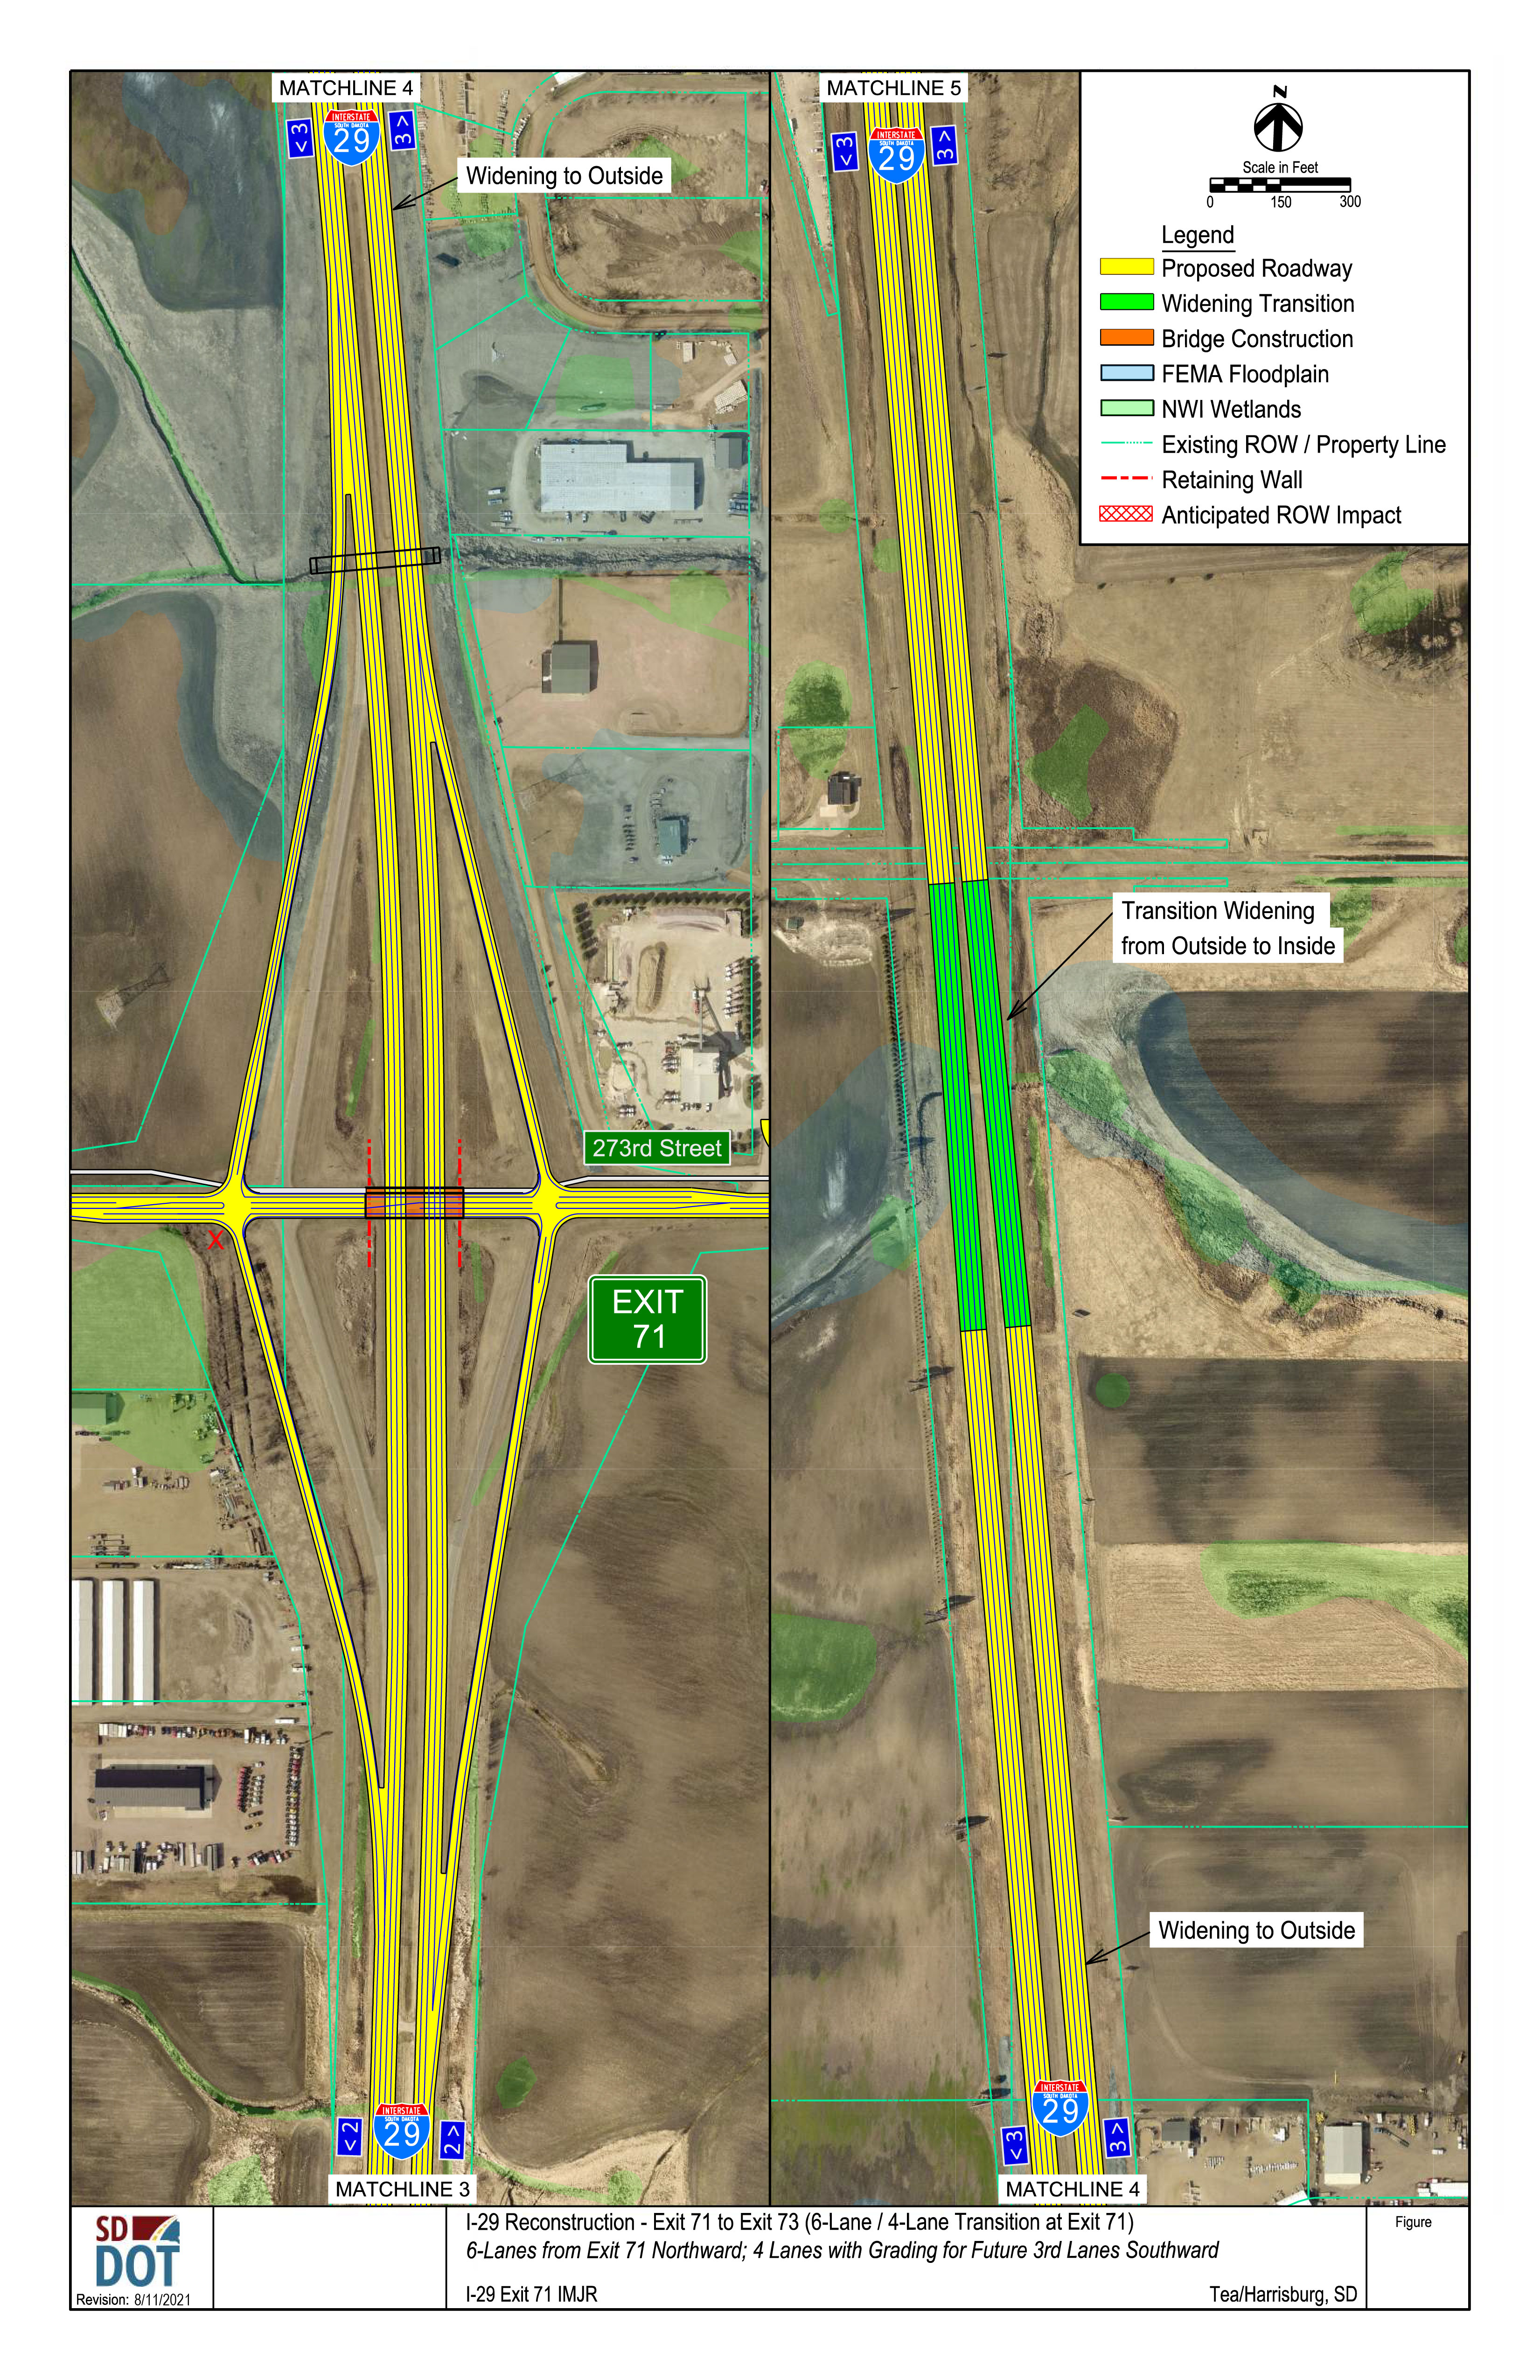 This image shows the conceptual layout of a 4-lane section with grading for a future third lane in each direction from exits 71 to 73. Details on the diagram include the proposed roadway, the widening transition, bridge construction, FEMA floodplain, NWI Wetlands, existing right of way and property lines, retaining walls and anticipated right of way impacts.